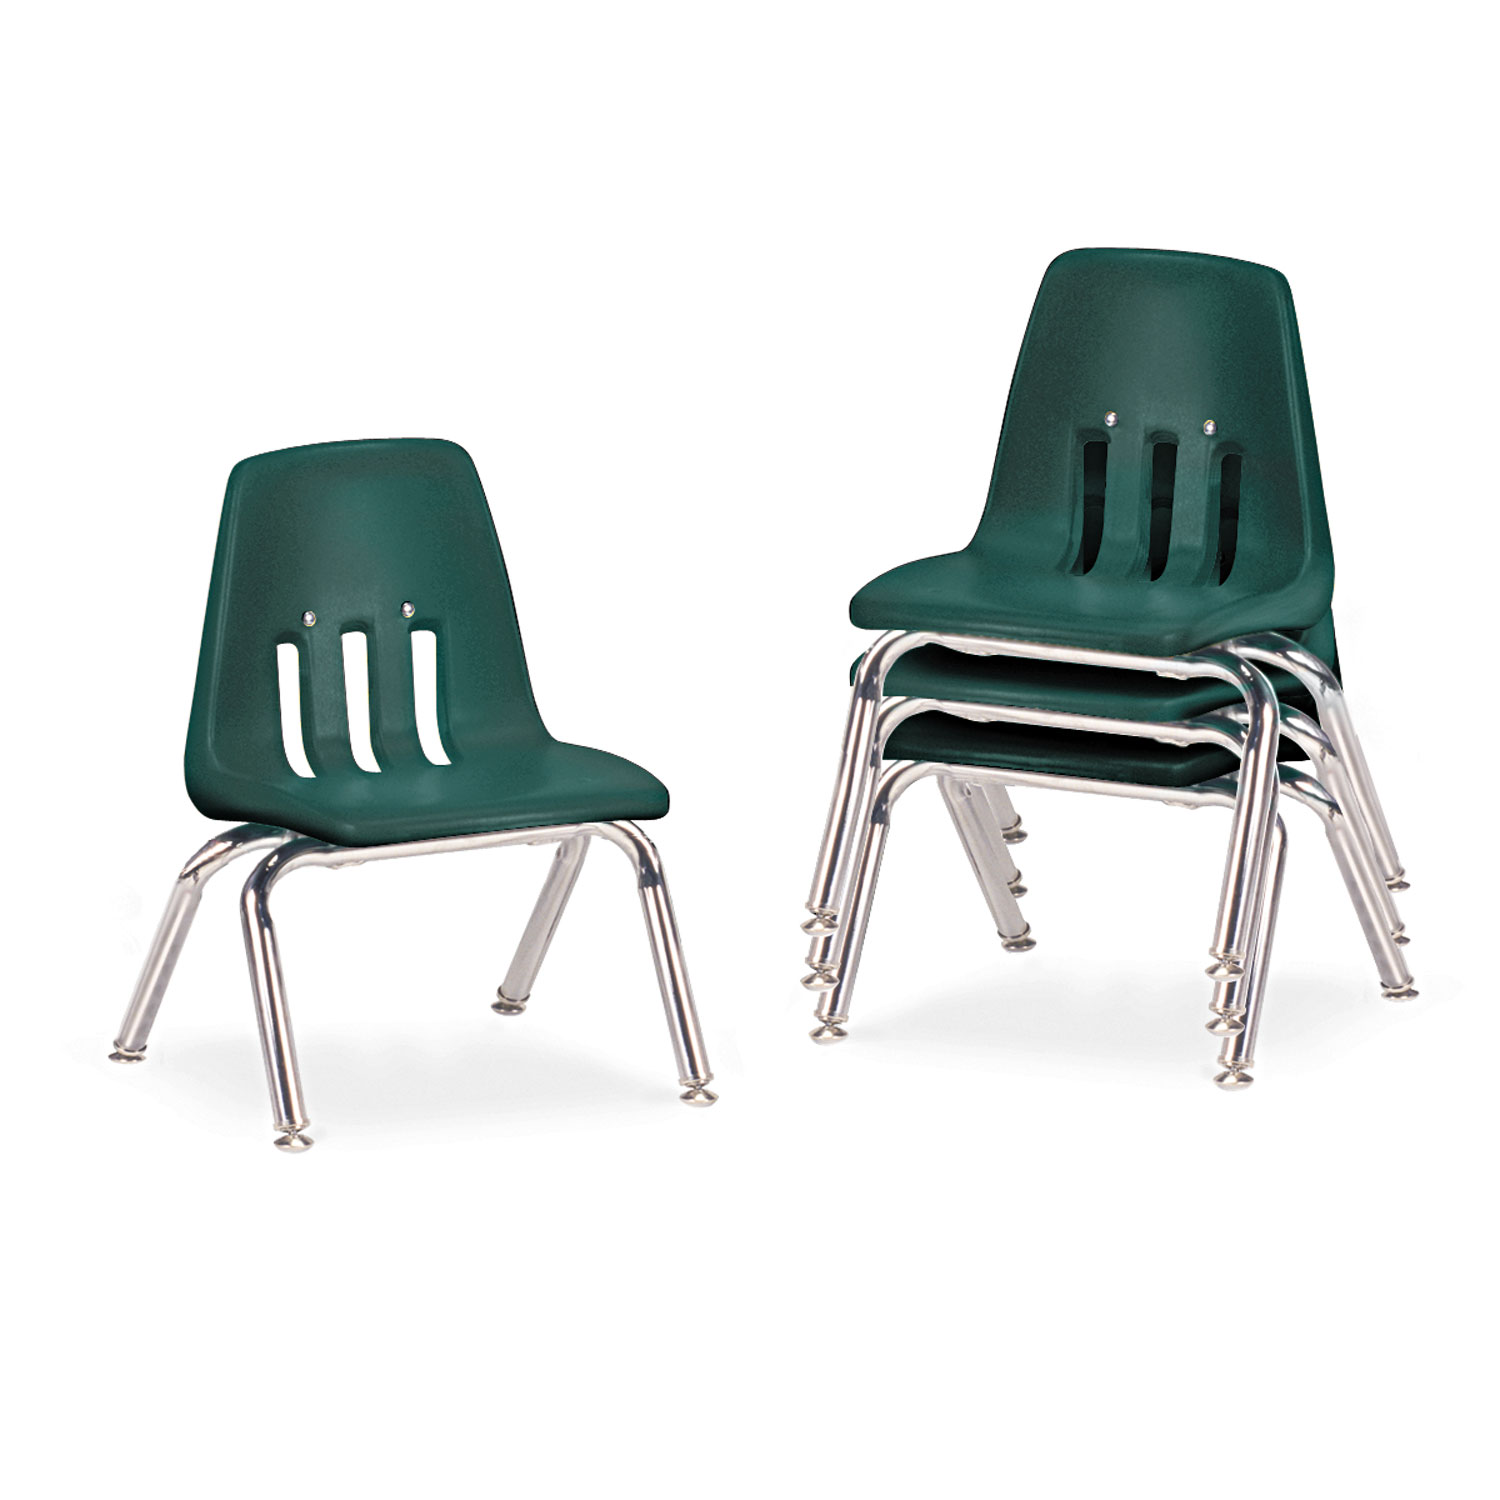 9000 Series Classroom Chairs, 10 Seat Height, Forest Green/Chrome, 4/Carton